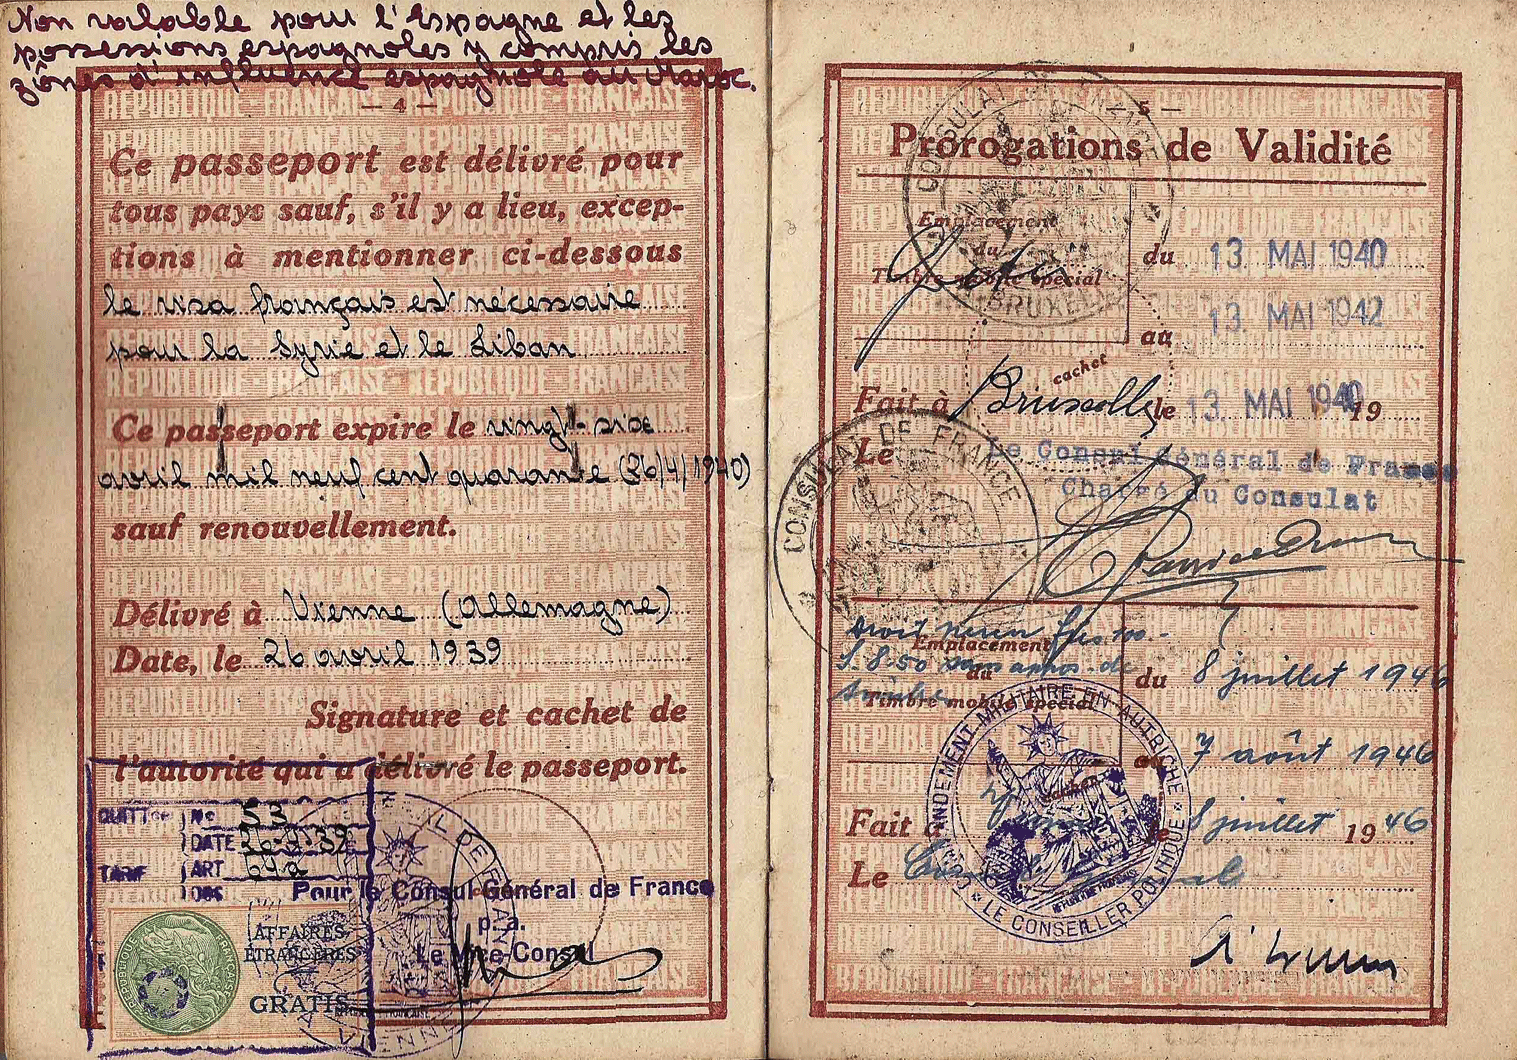 1939 French official's passport